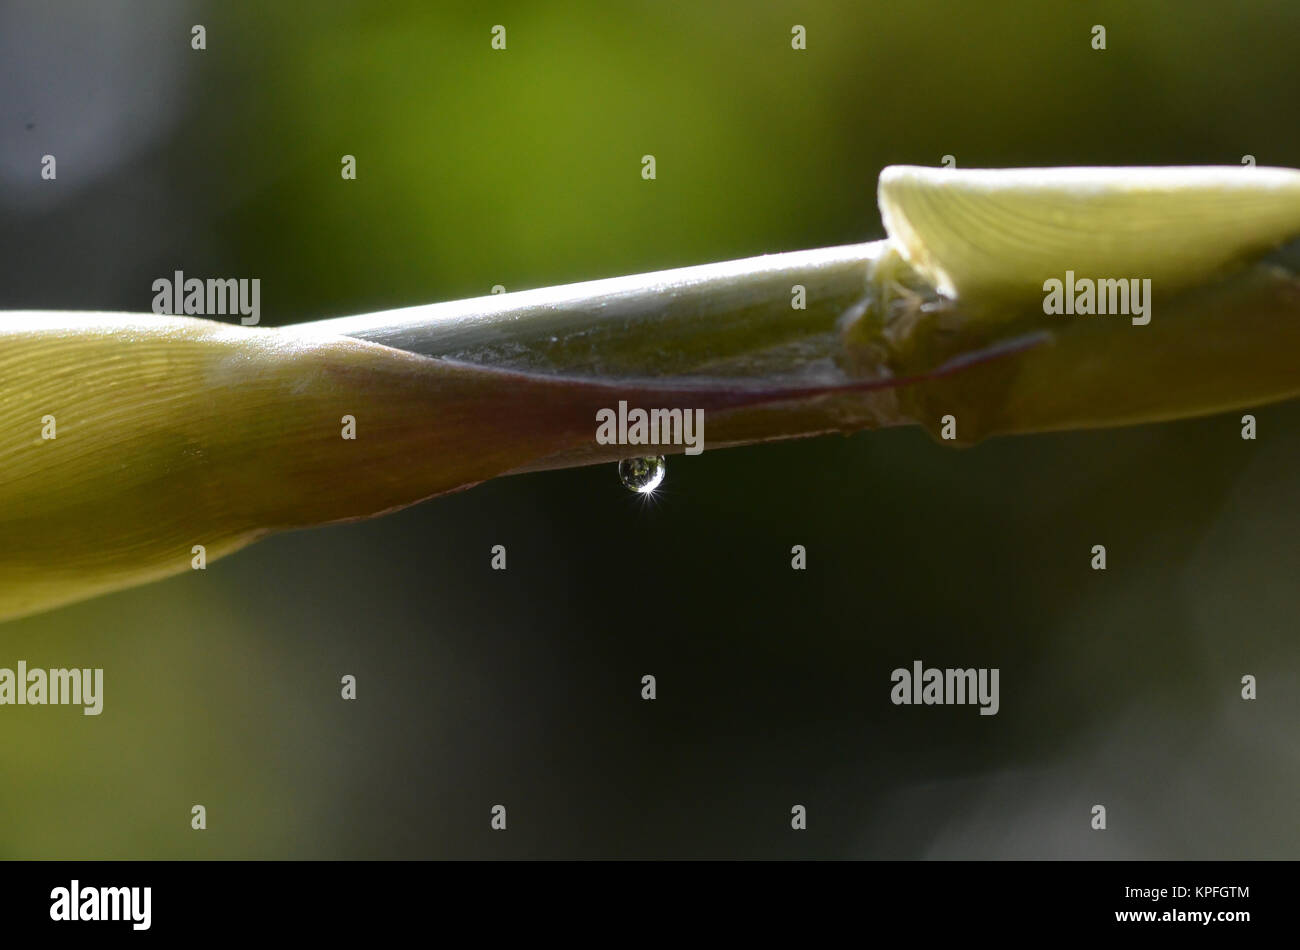 A drop of water on a bamboo branch Stock Photo